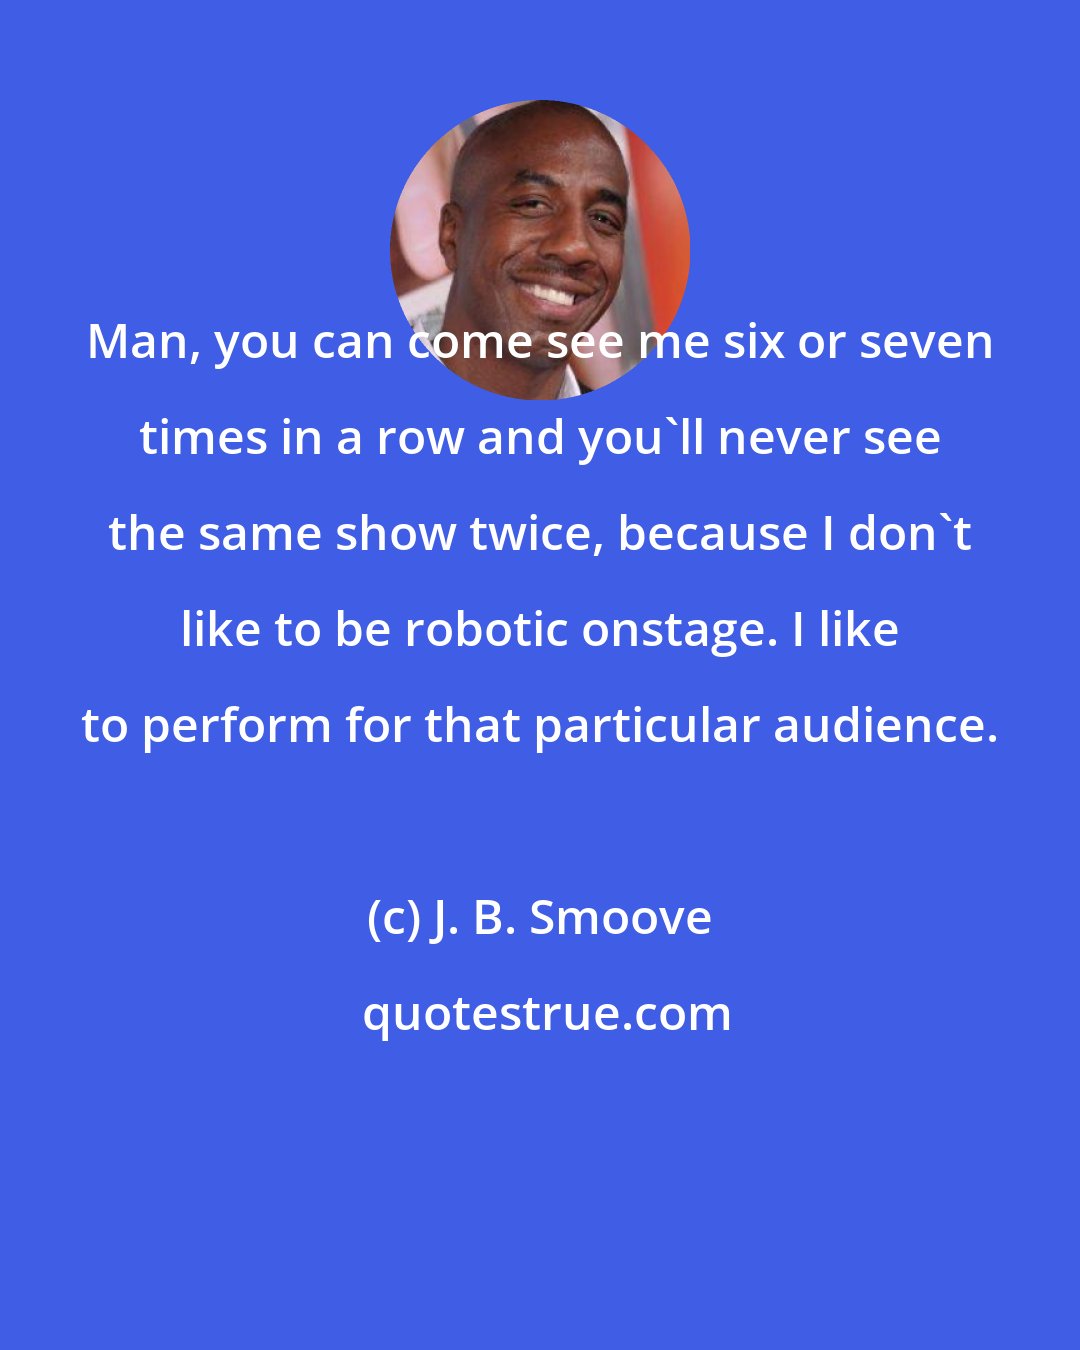 J. B. Smoove: Man, you can come see me six or seven times in a row and you'll never see the same show twice, because I don't like to be robotic onstage. I like to perform for that particular audience.